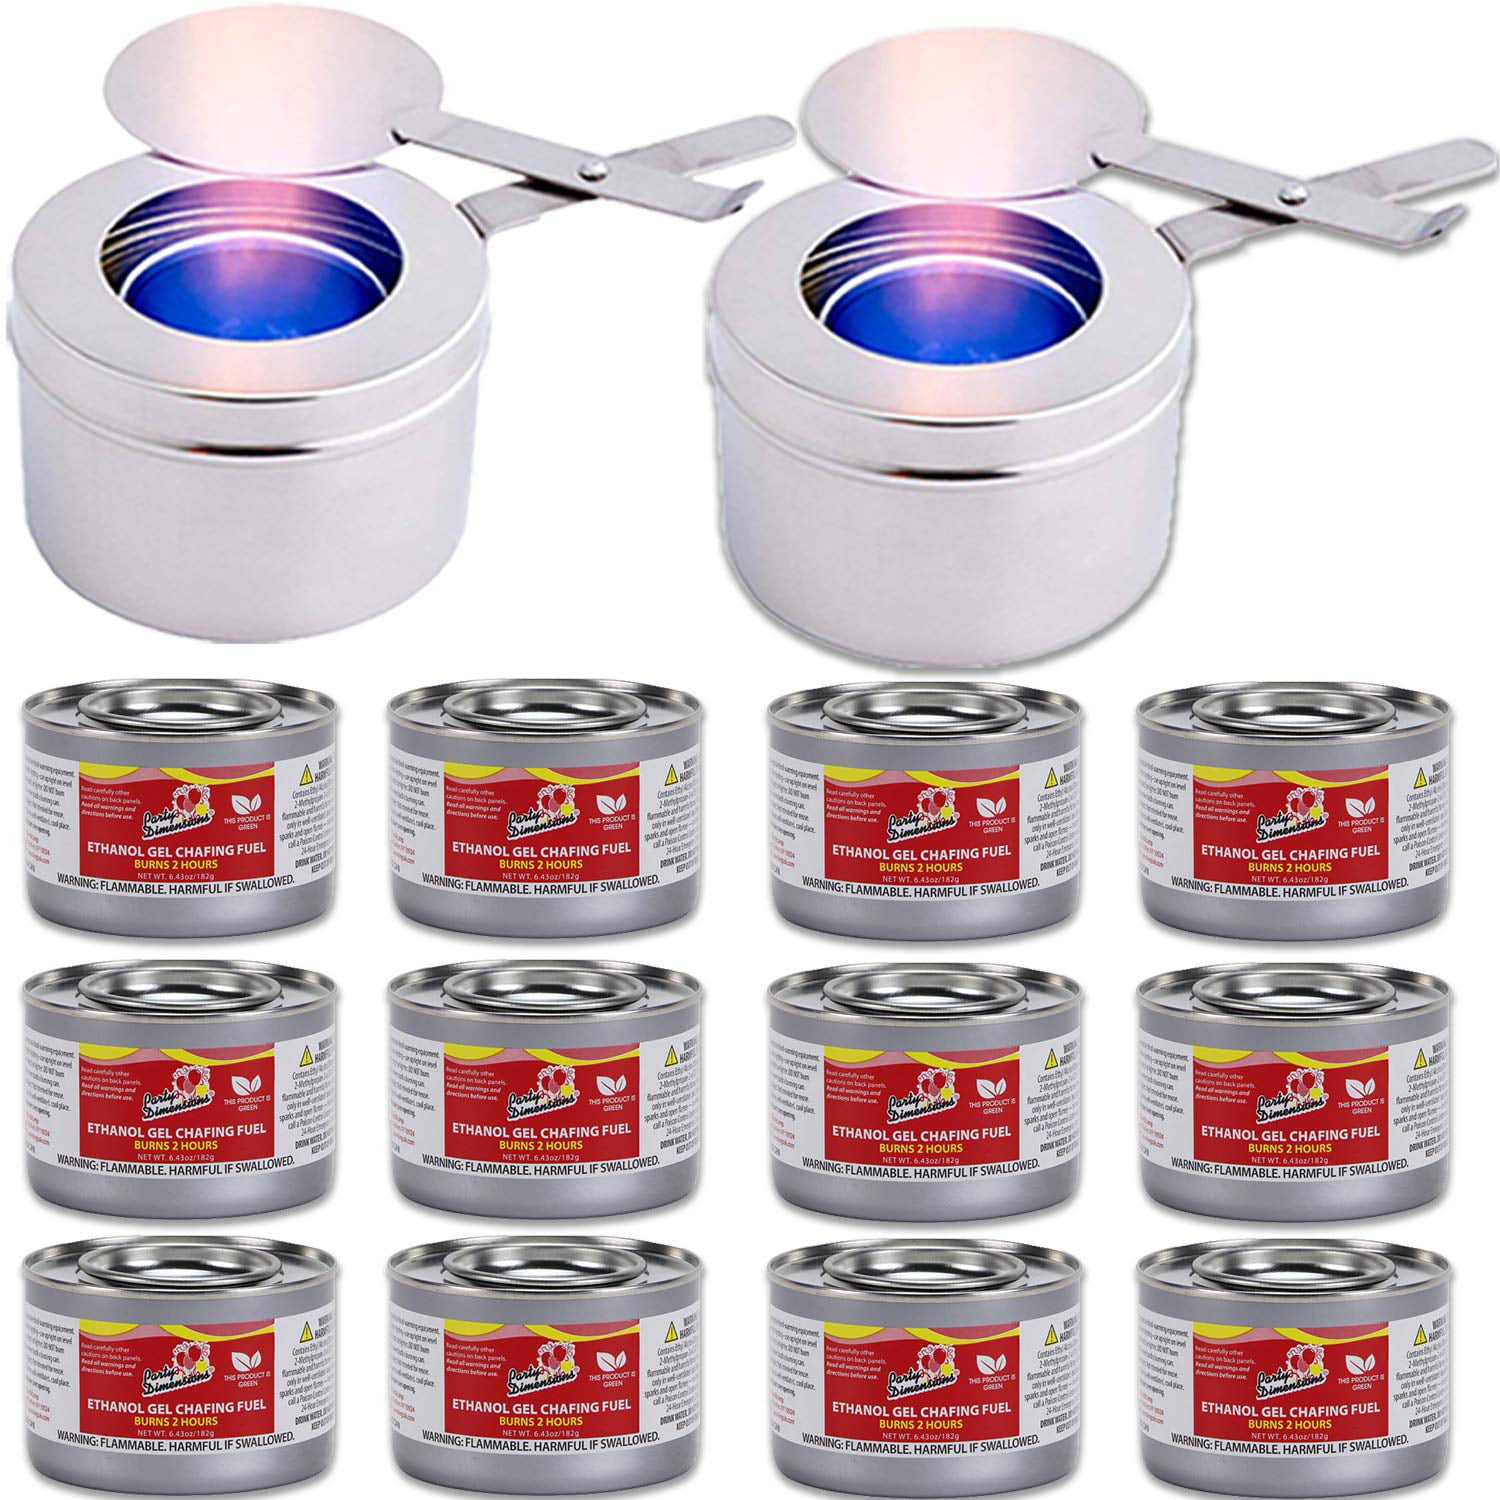 12 CHAFING DISH FUEL GEL CANS 2.5 HOUR BURN TIME EACH CATERERS CHAFING TINS 